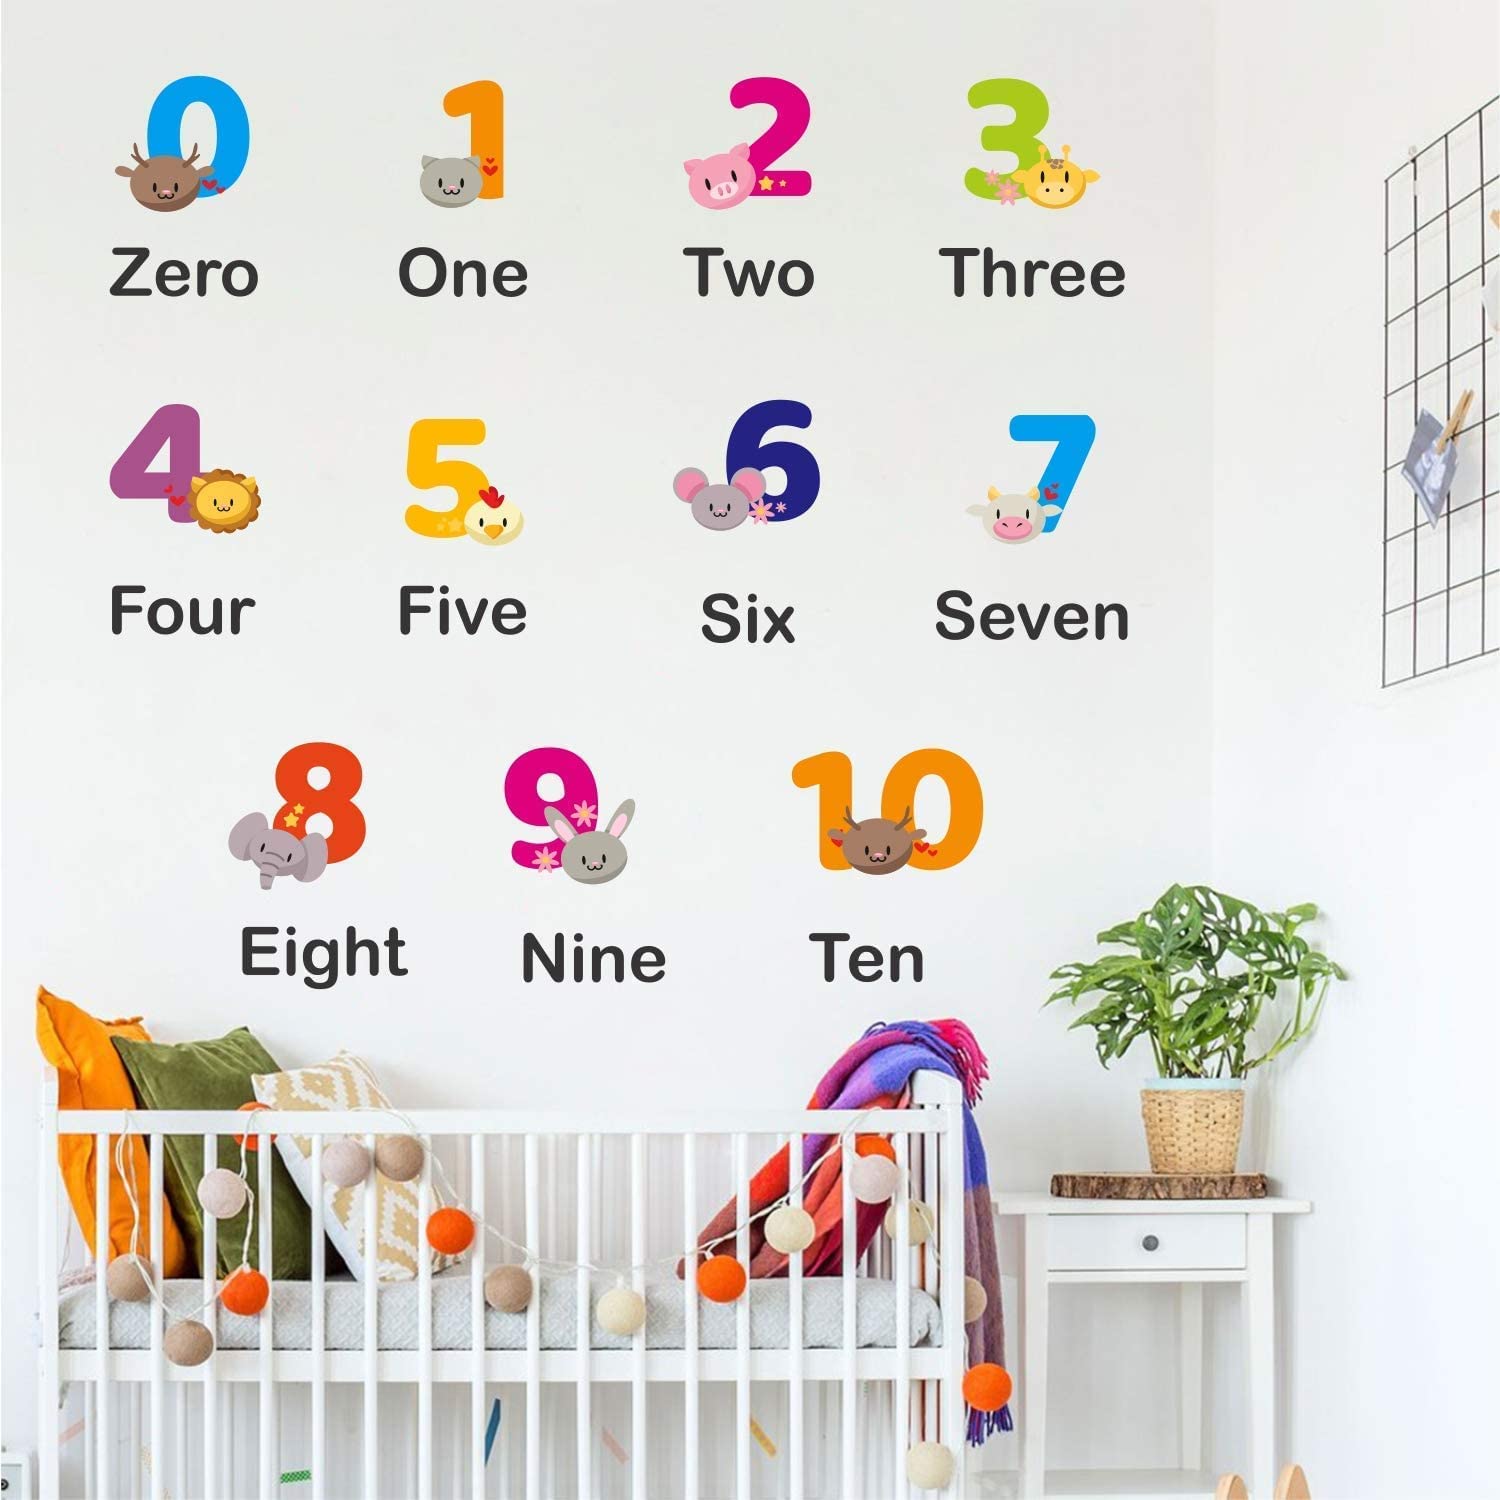 Colorful educational wall sticker poster with numbers design